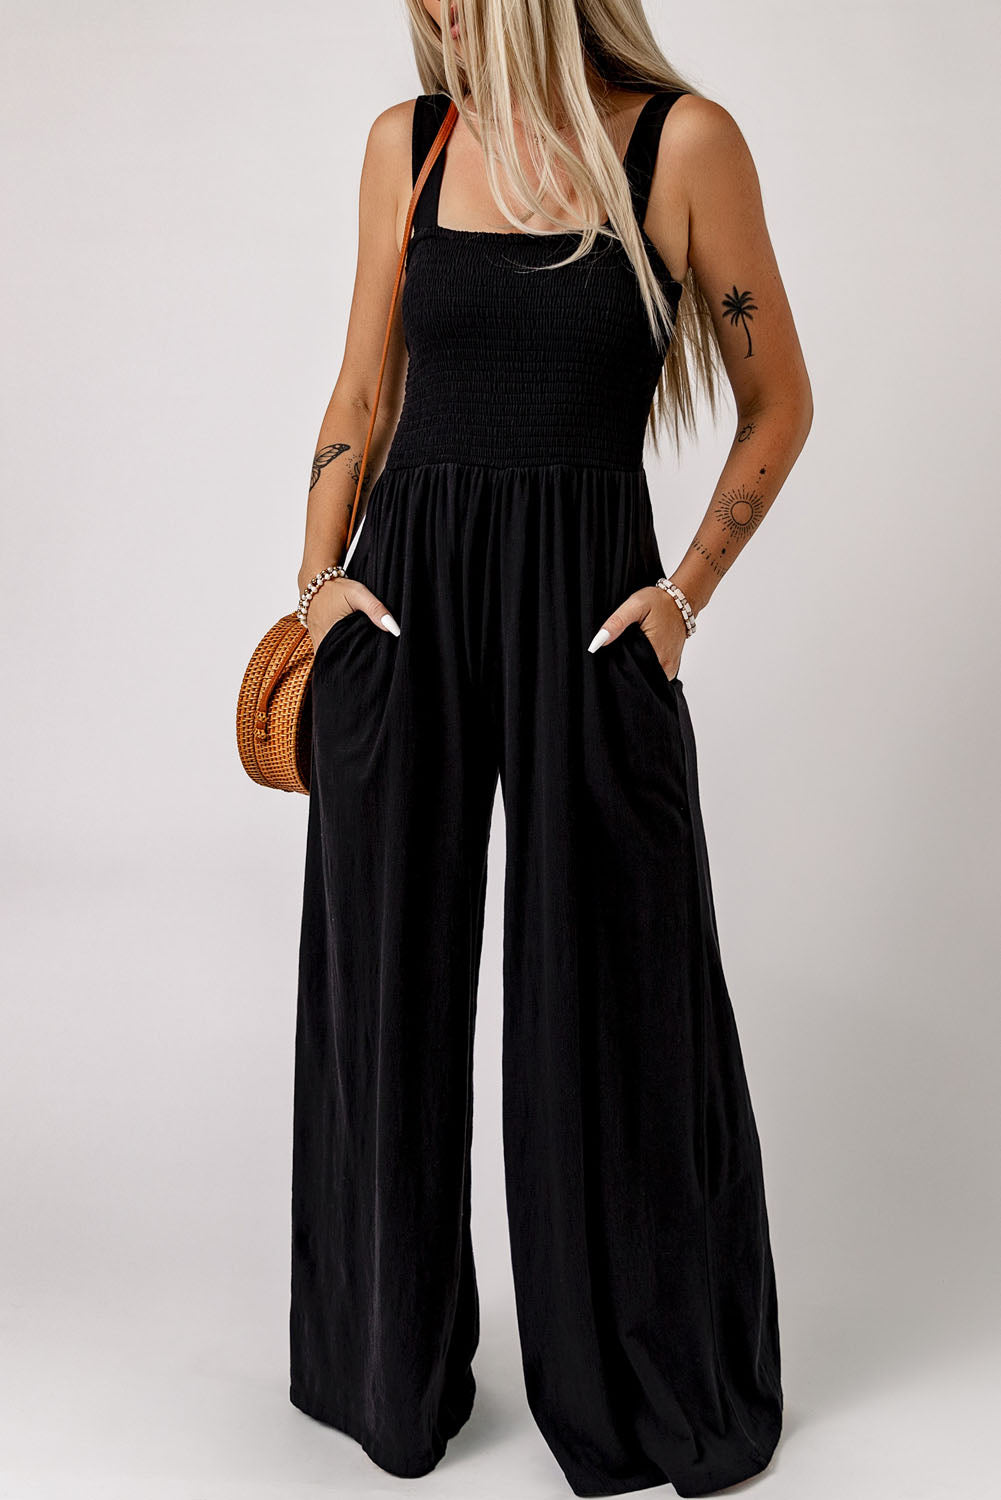 Wedding Guest Jumpsuit | Jumpsuit With Pockets | Private Label Styles